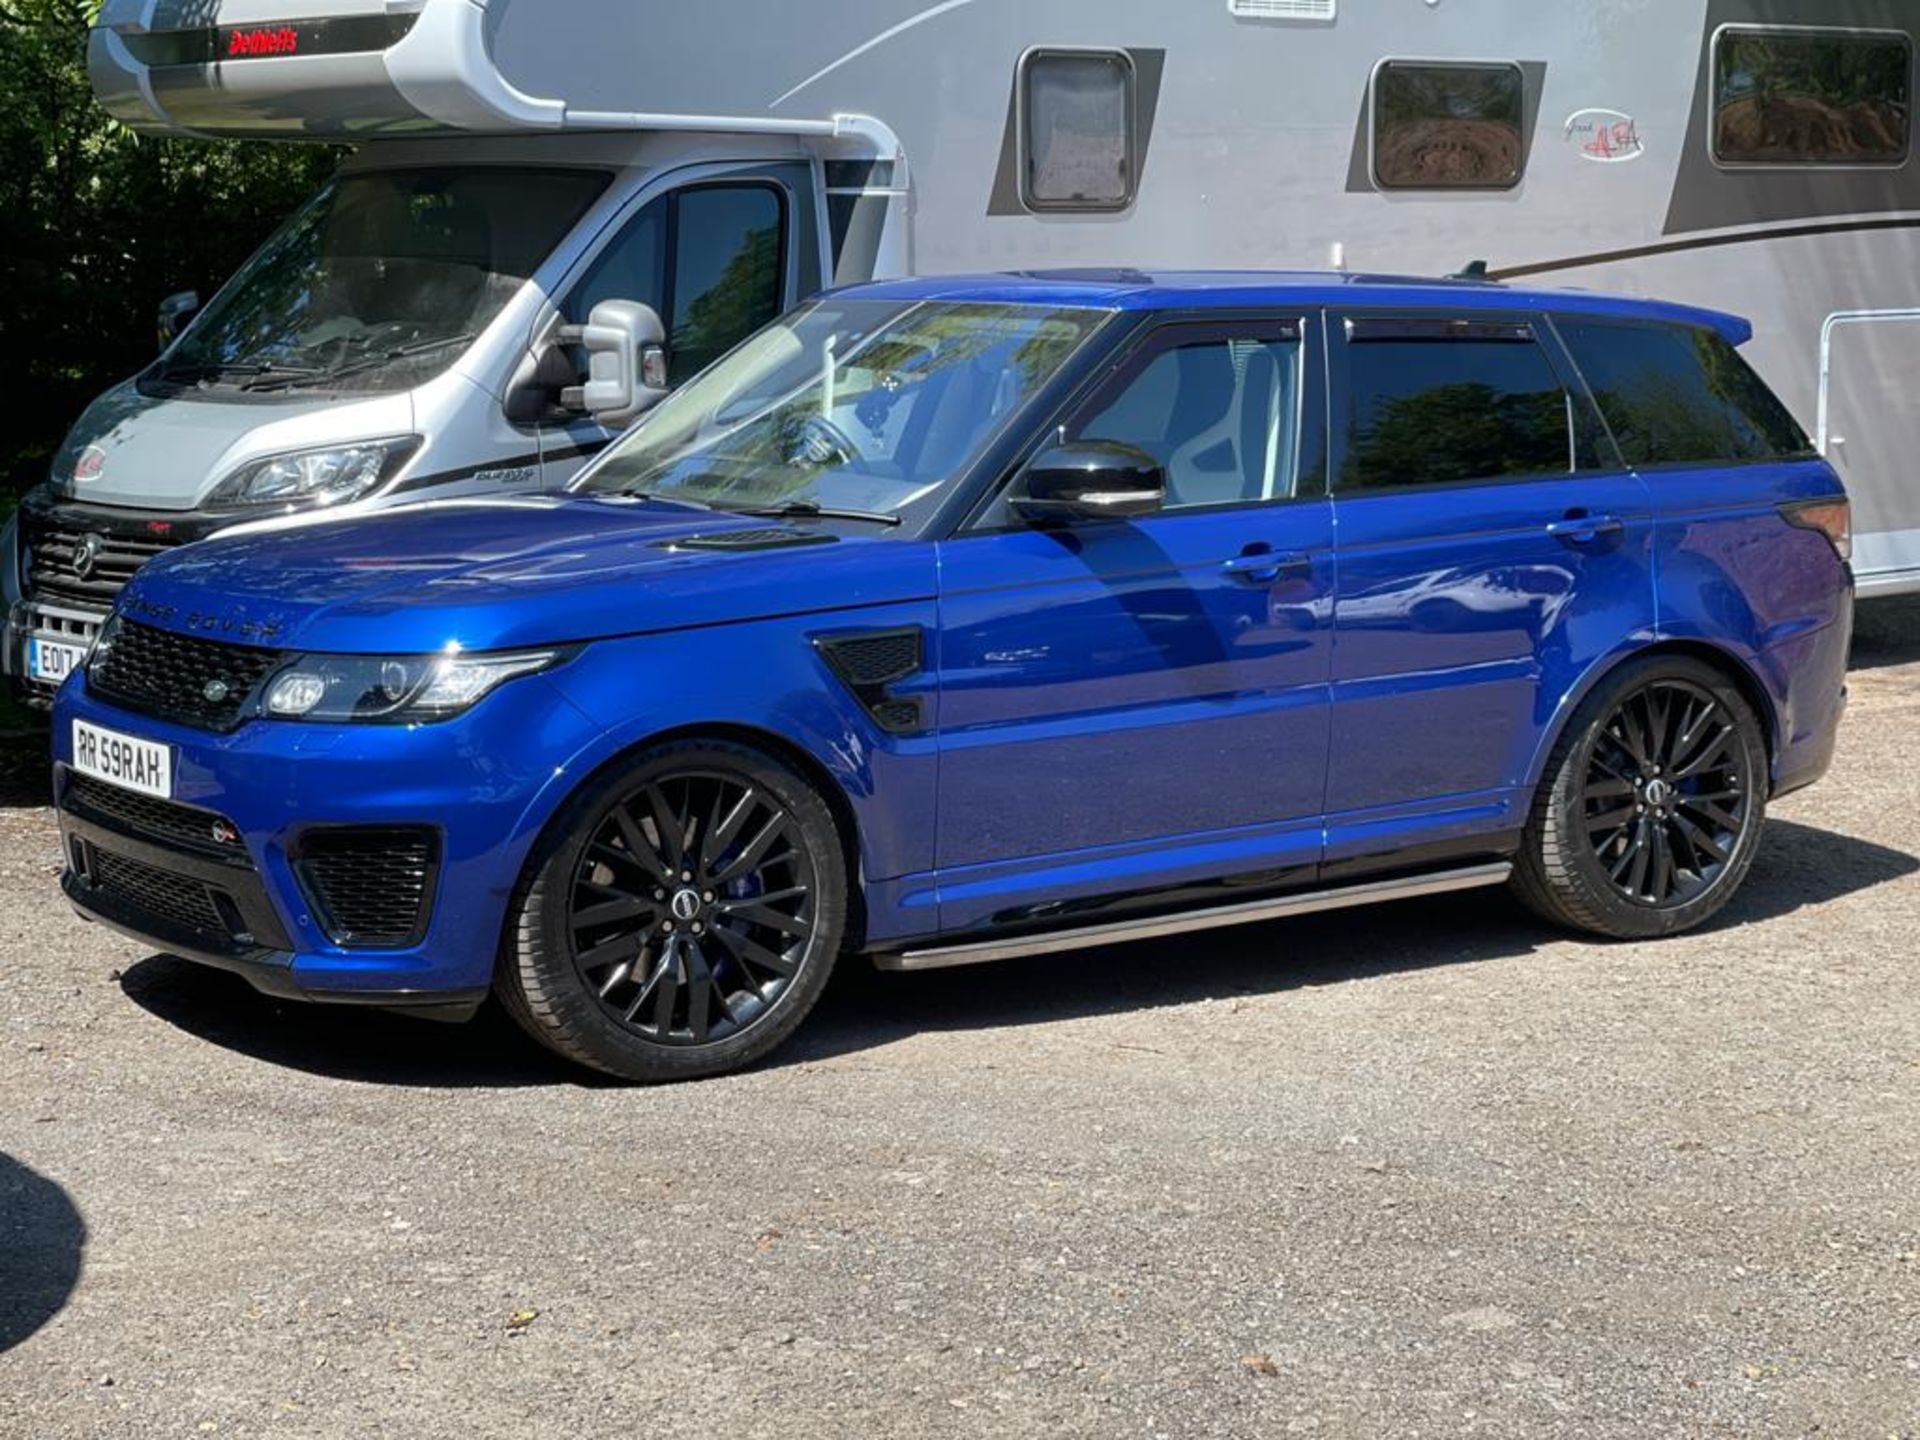 2016 RANGE ROVER SPORT SVR AUTOBIOGRAPHY DYNAMIC V8 SUPERCHARGED AUTOMATIC 5.0 550PS PETROL ENGINE - Image 2 of 28